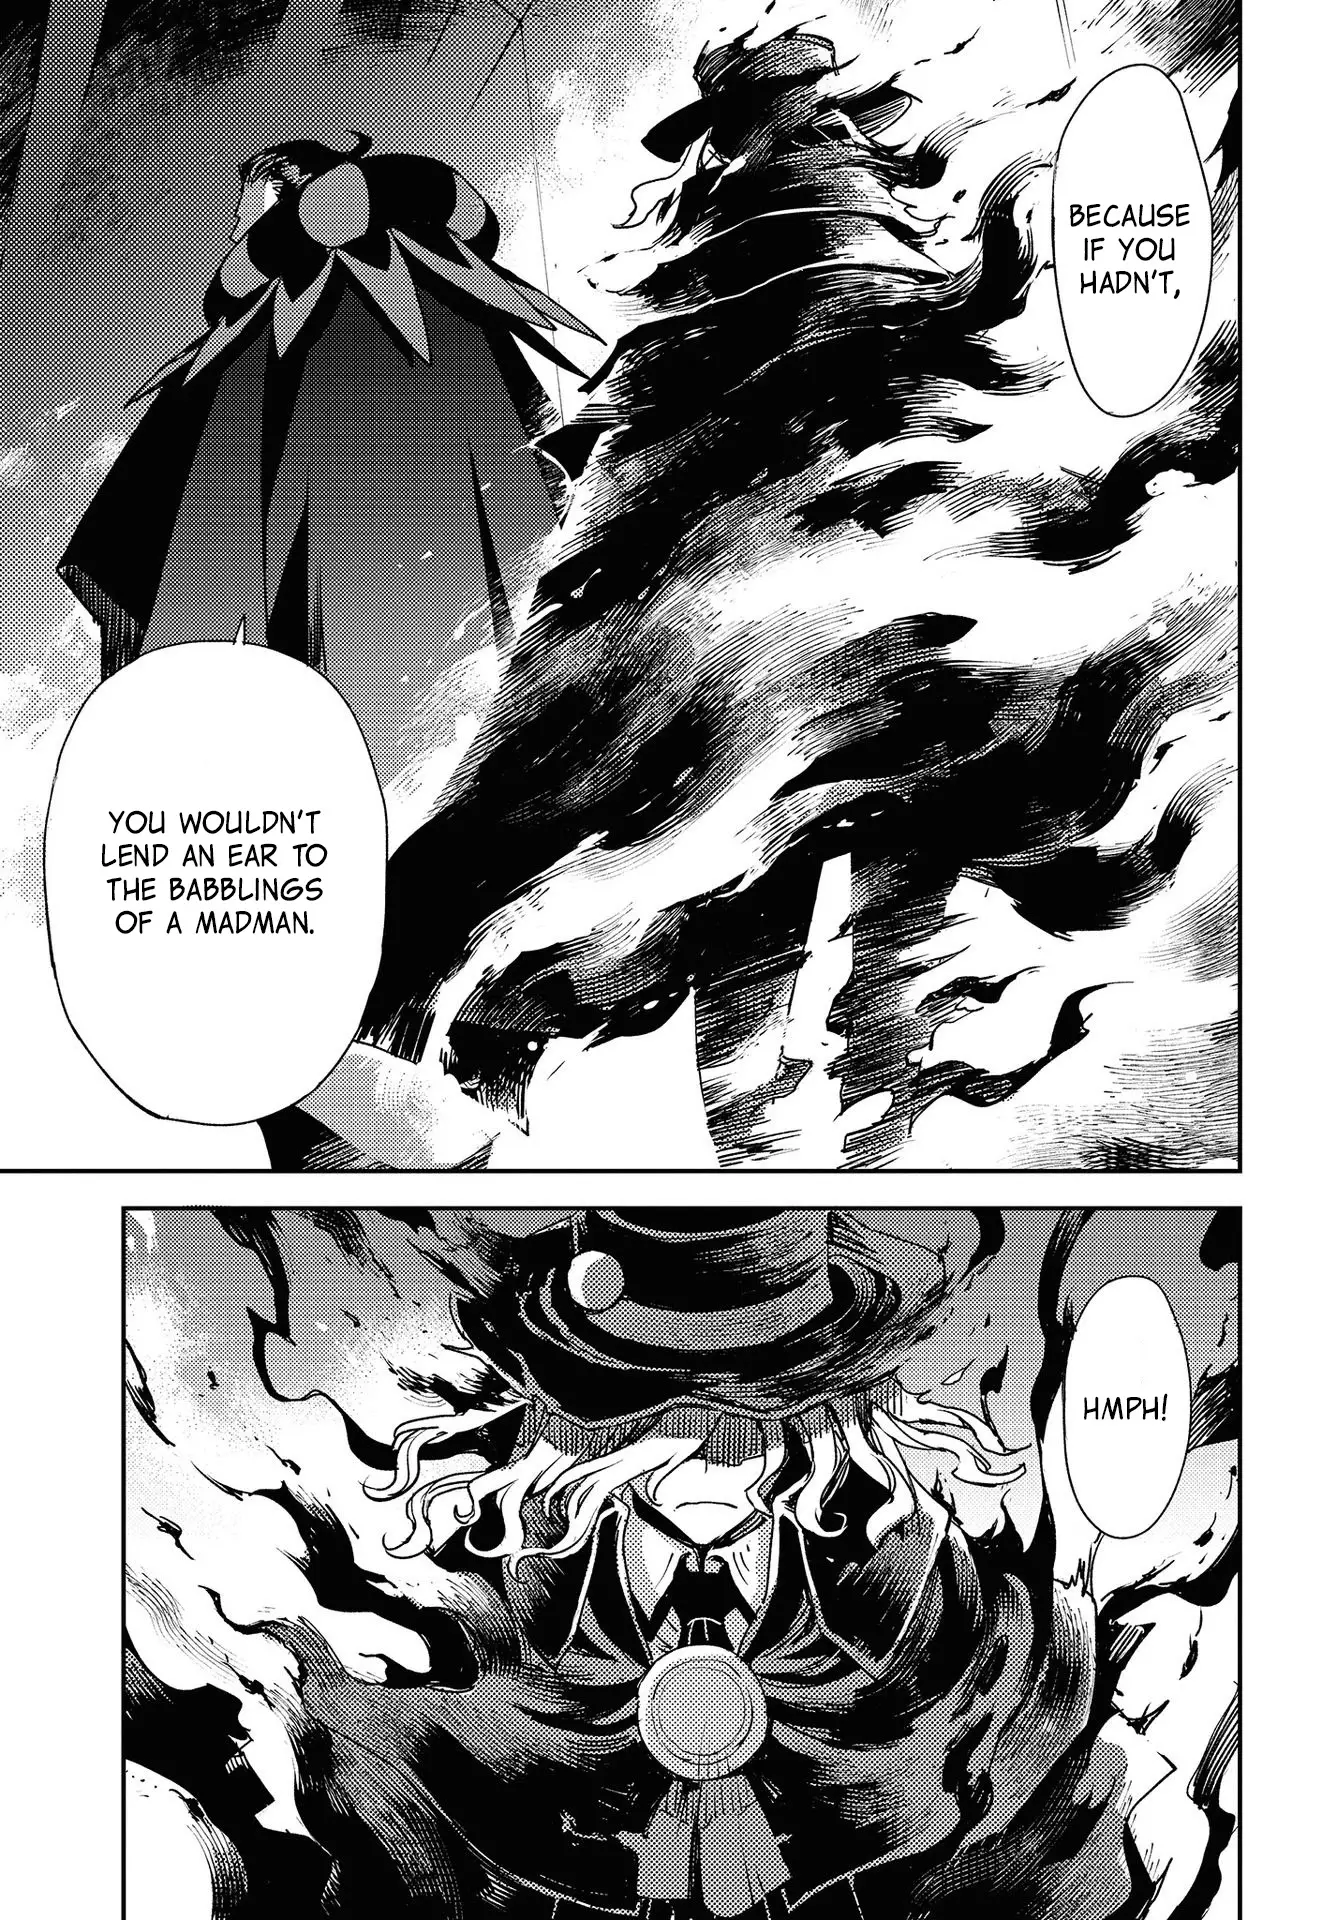 Fate/grand Order: Epic Of Remnant - Subspecies Singularity Iv: Taboo Advent Salem: Salem Of Heresy - 17 page 9